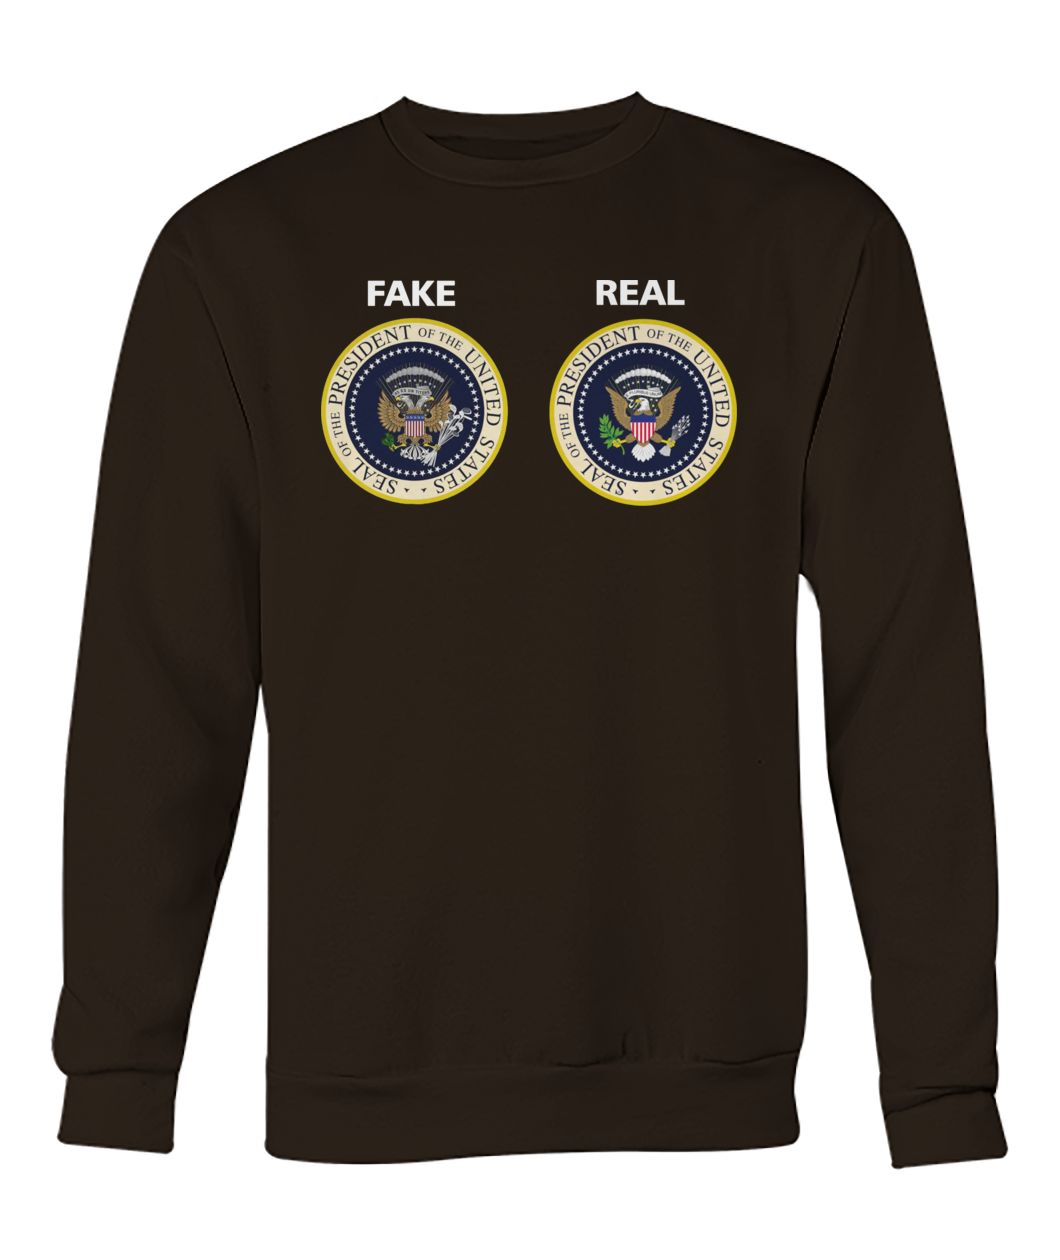 Real and fake presidential seal crew neck sweatshirt